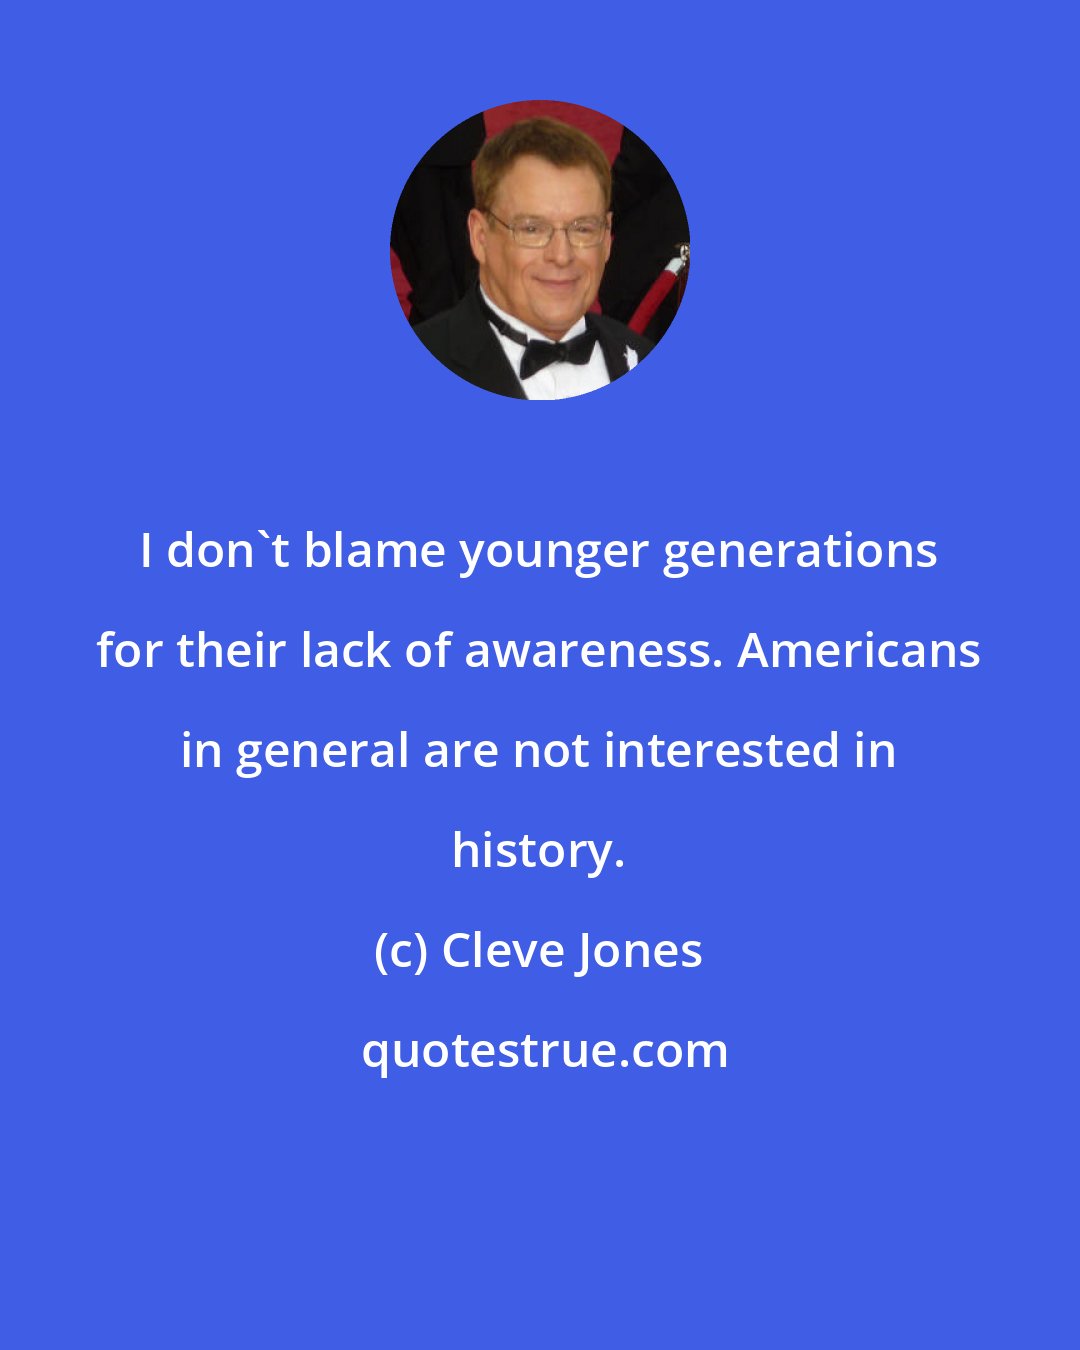 Cleve Jones: I don't blame younger generations for their lack of awareness. Americans in general are not interested in history.